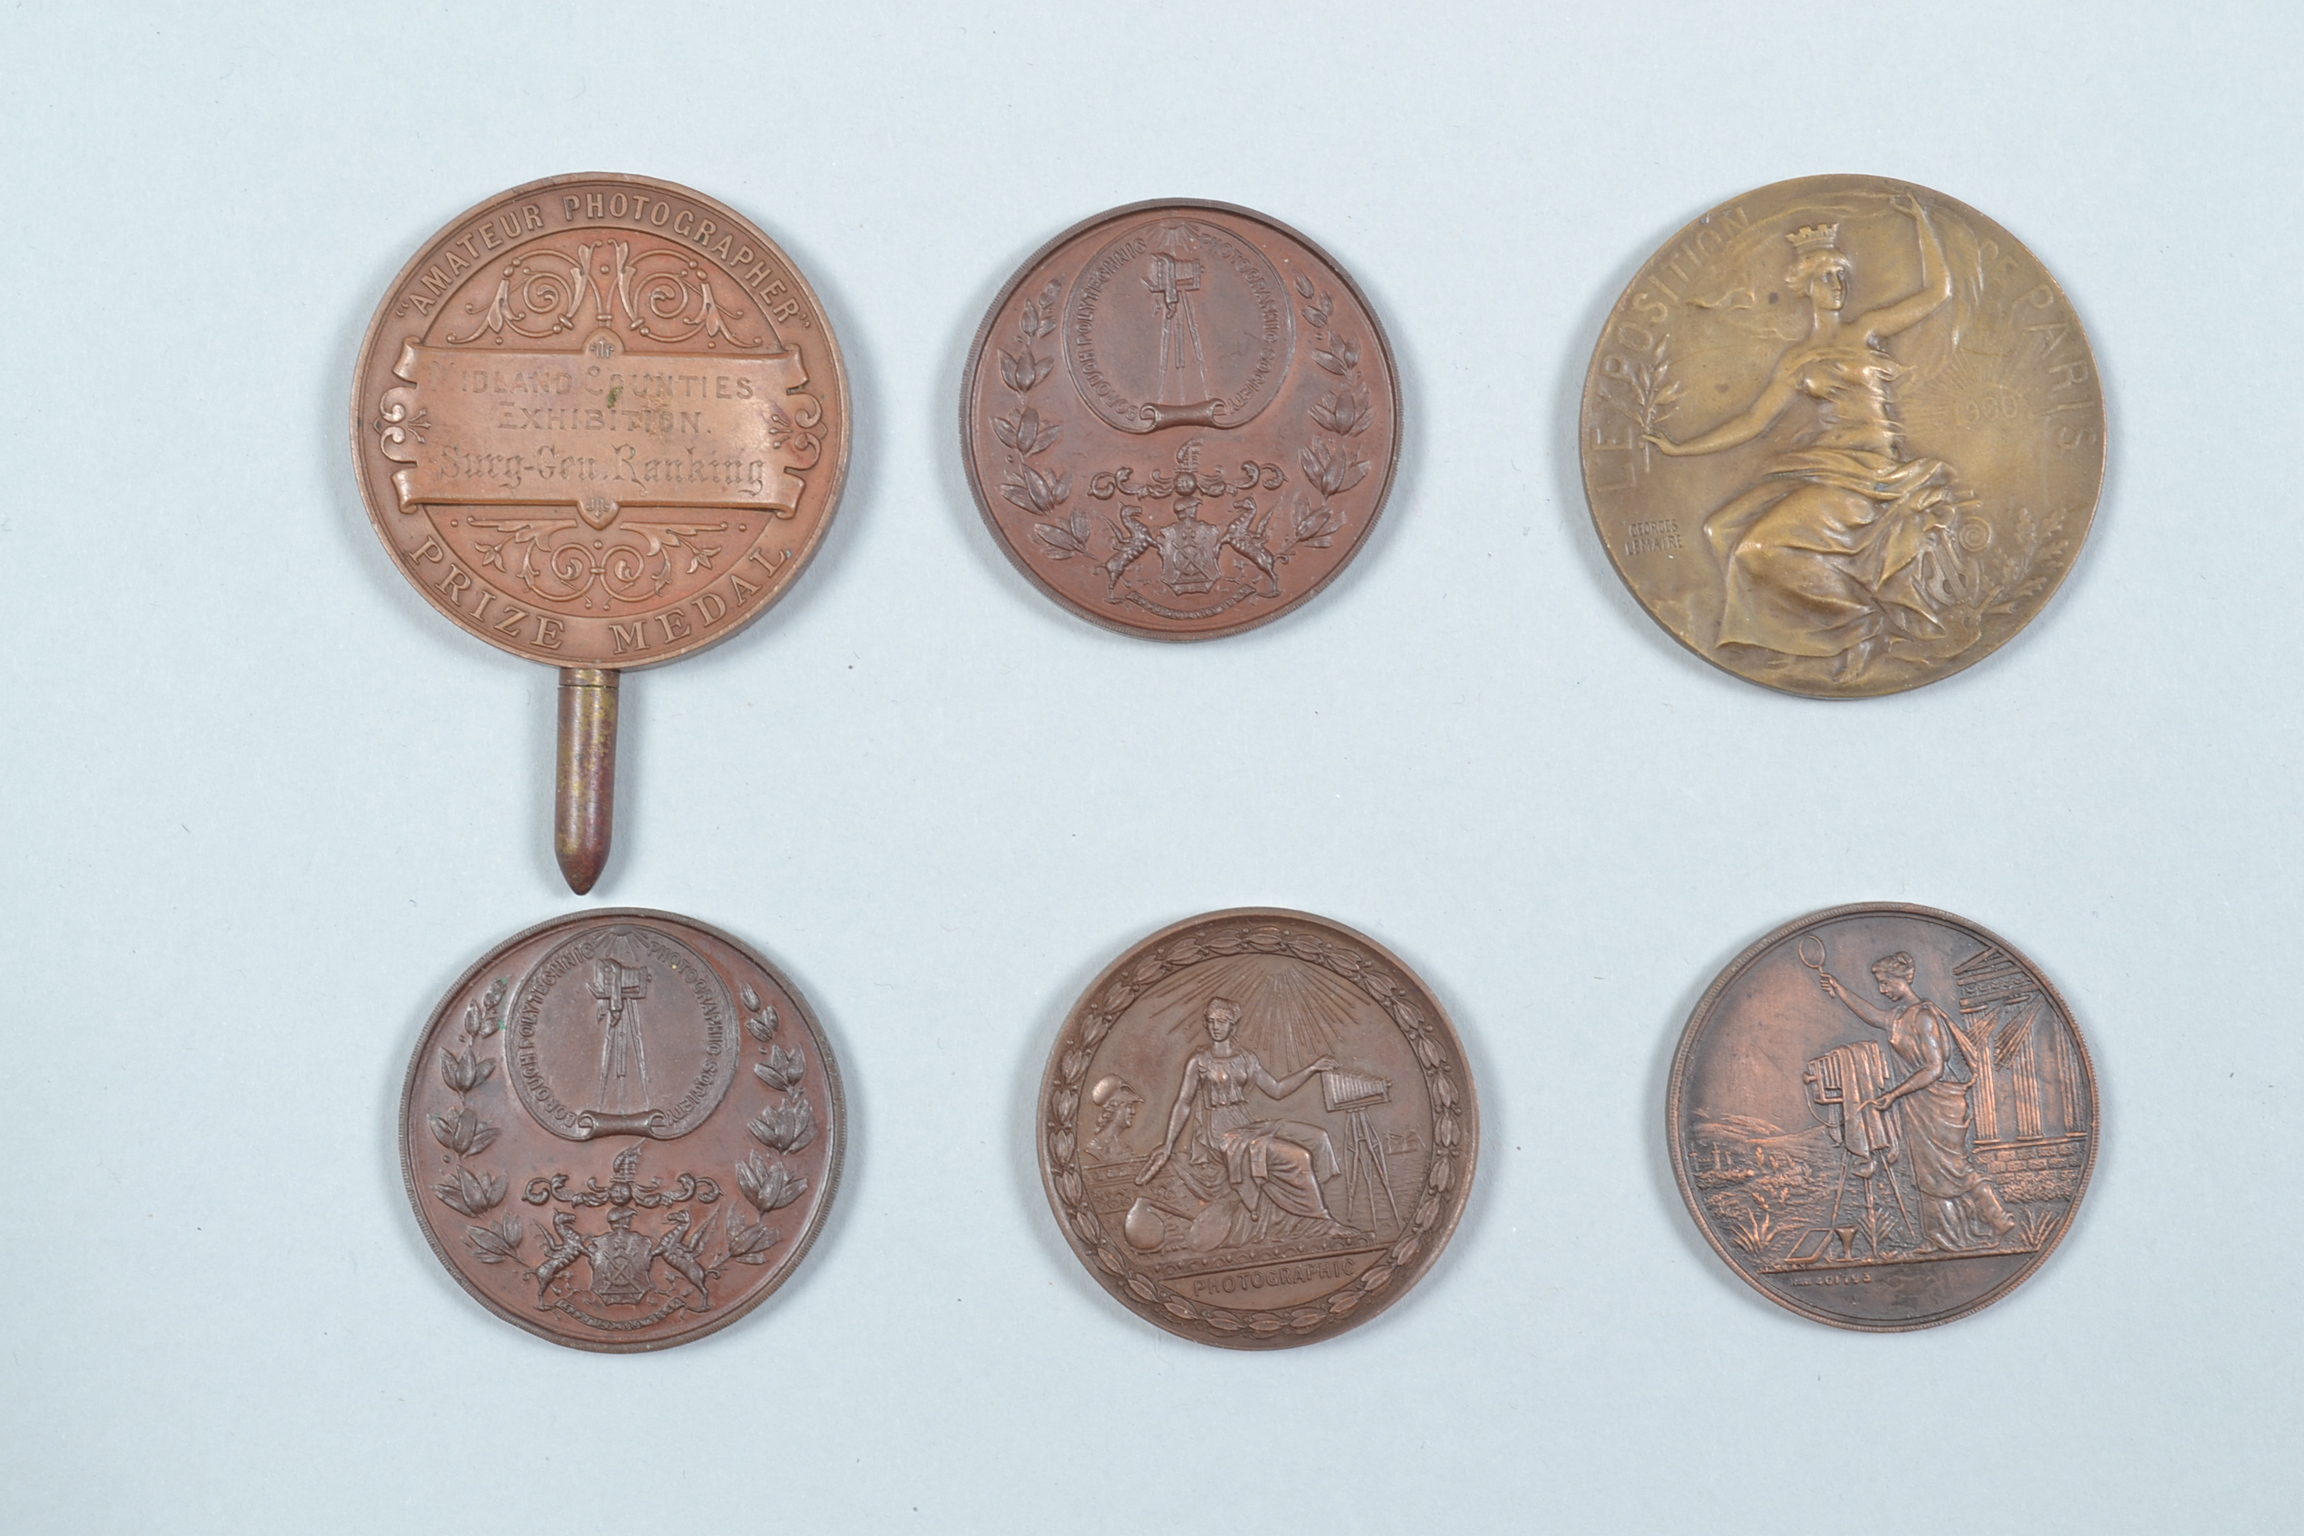 Late 19th to Early 20th Century Bronze or Bronze-Coloured Photographic Award Medals, Paris